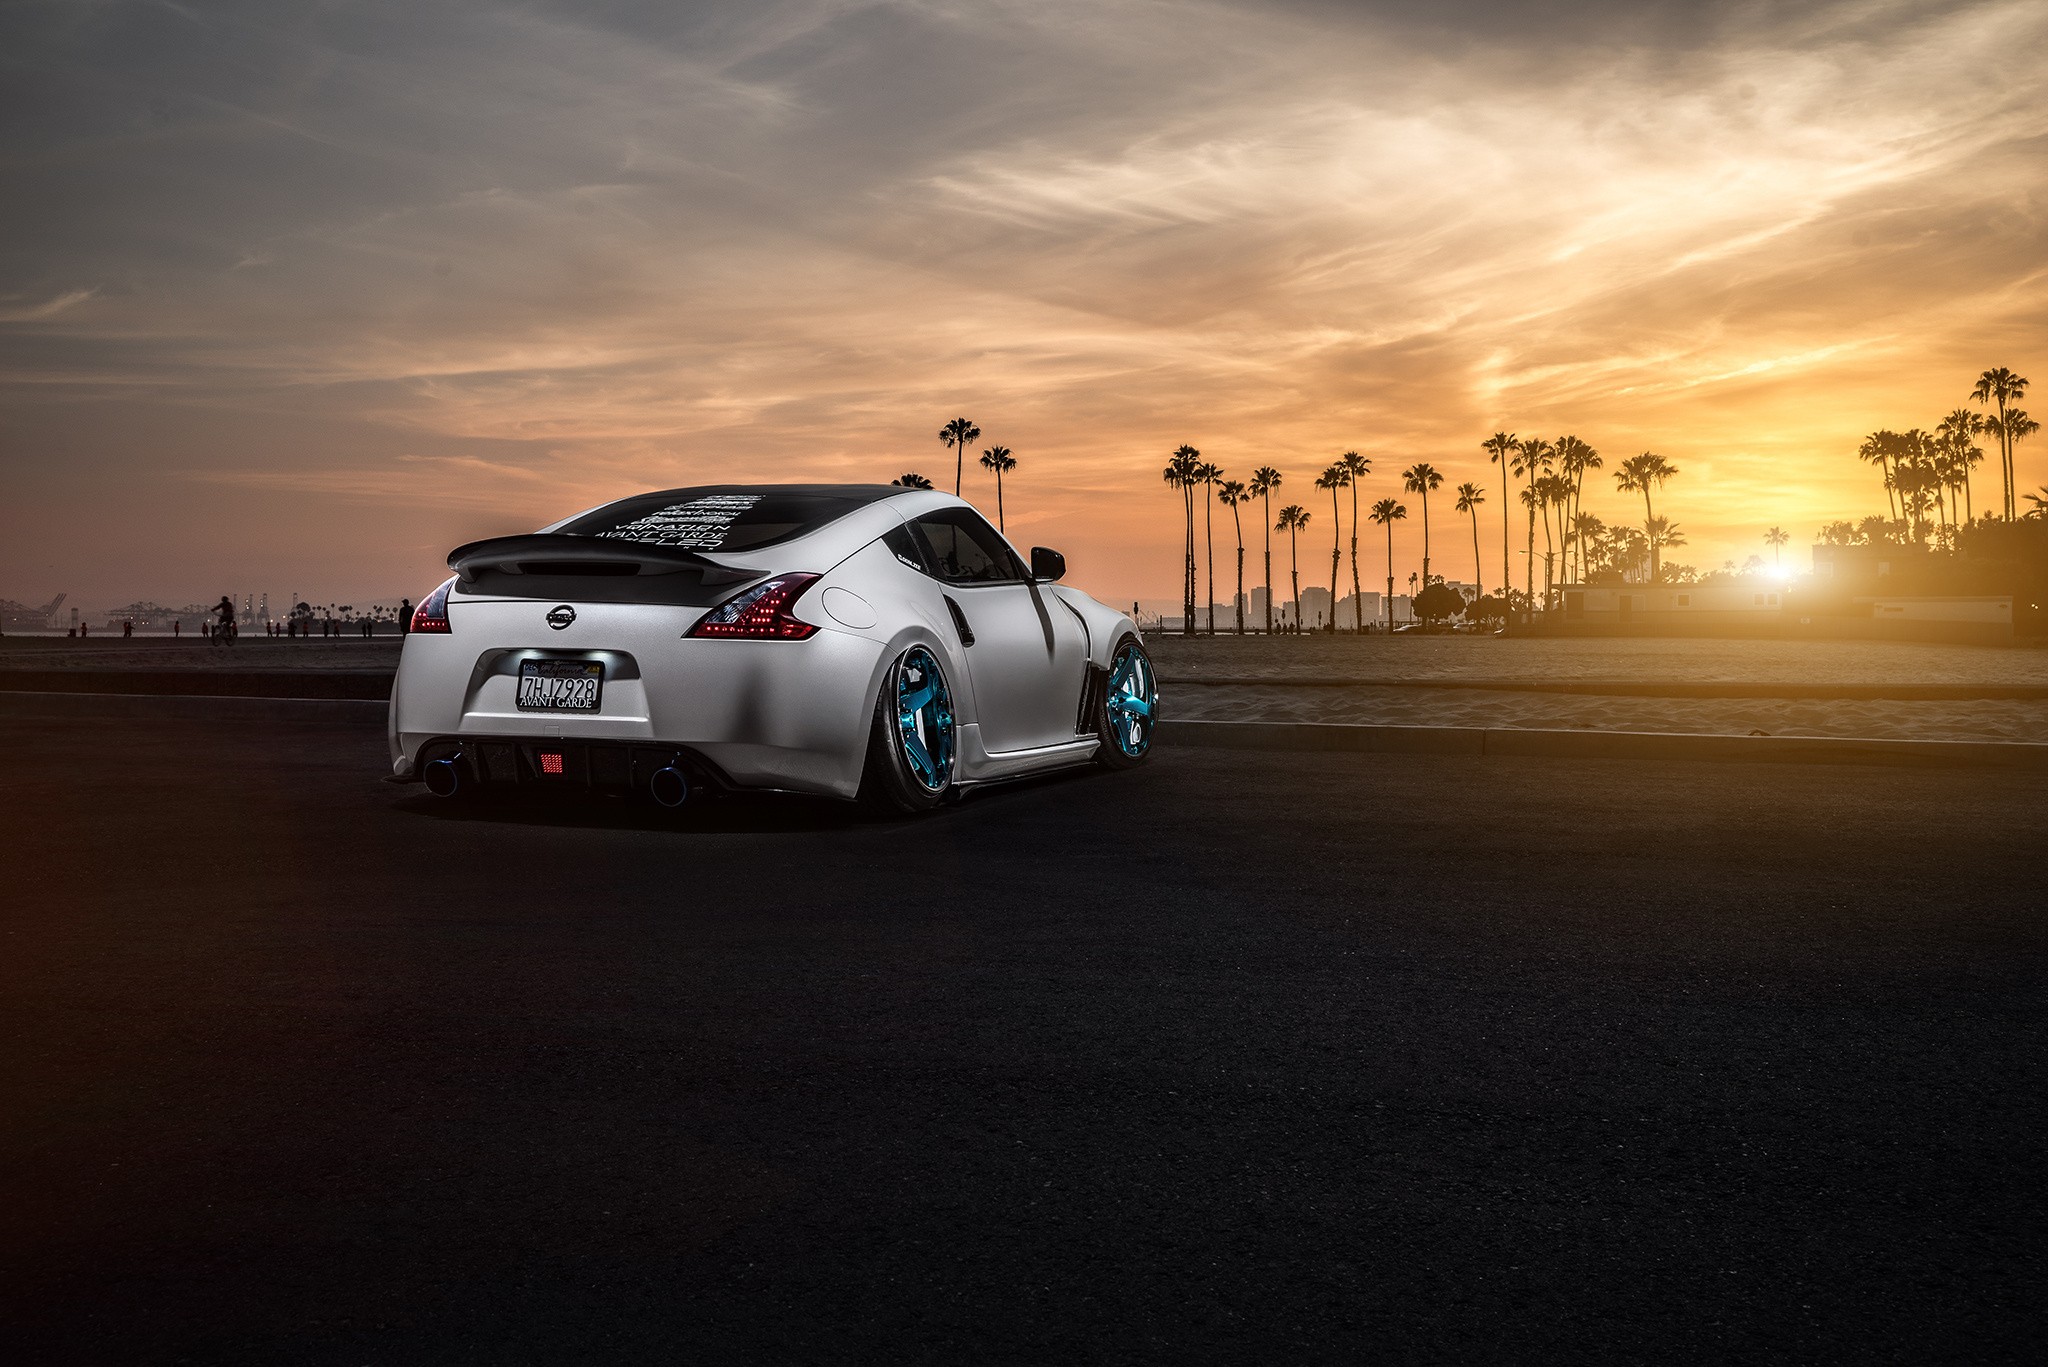 General 2048x1367 Nissan car stance (cars) sunlight palm trees colored wheels Nissan Fairlady Z Nissan 370Z silver cars vehicle sky Japanese cars